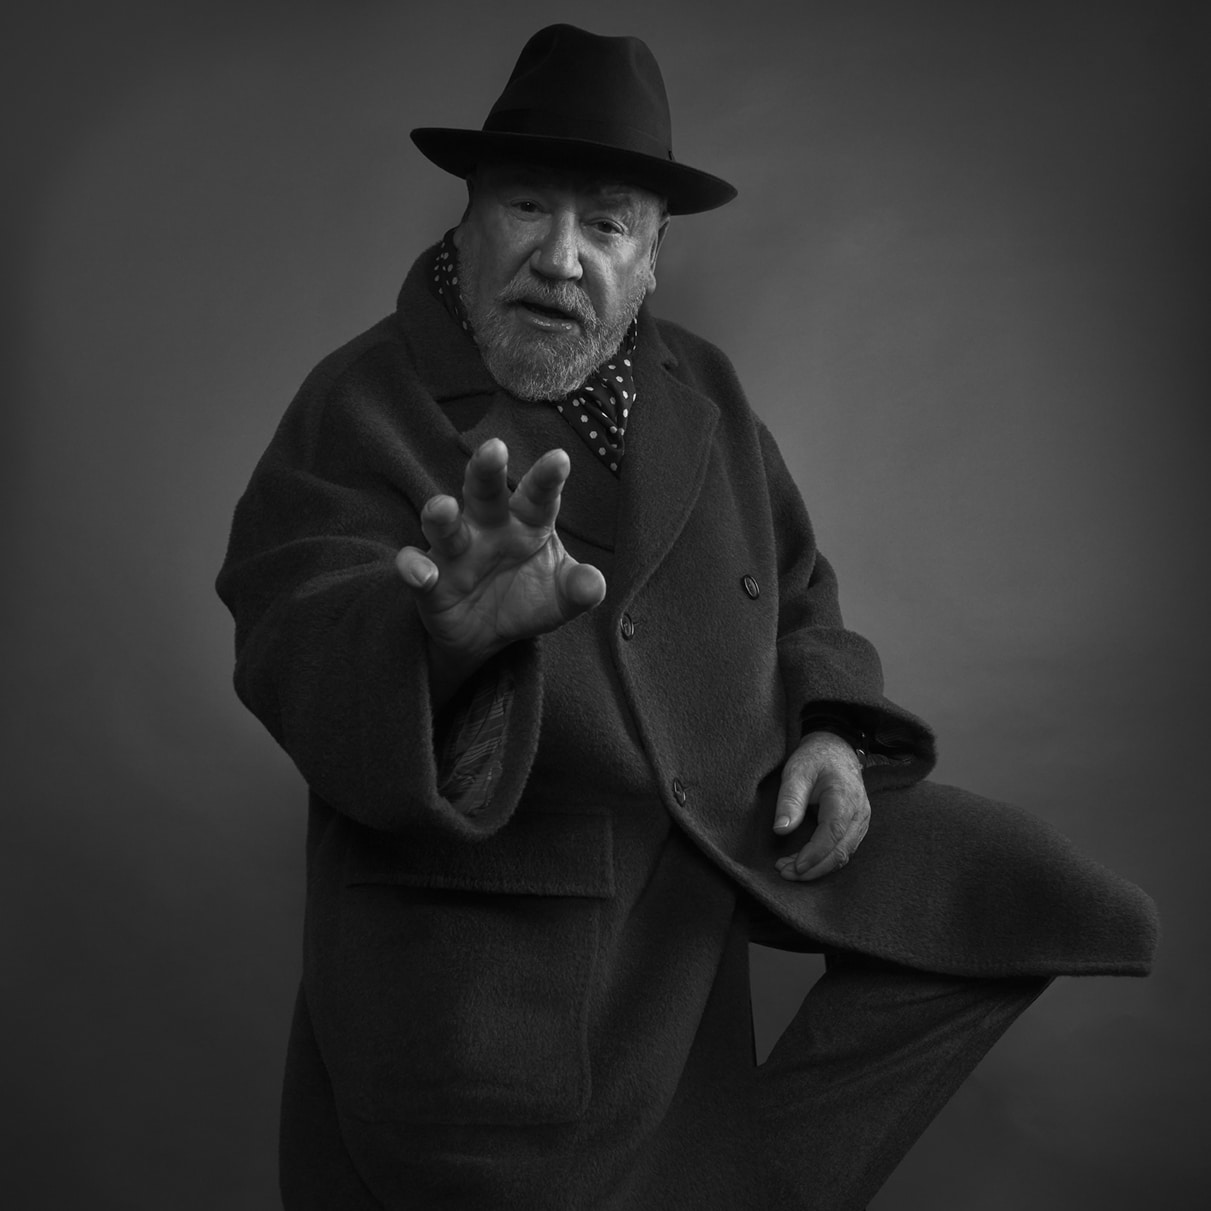 Ray wears Hat by Herbert Johnson, Coat and Scarf by Connoly // 📸 : Gavin Bond